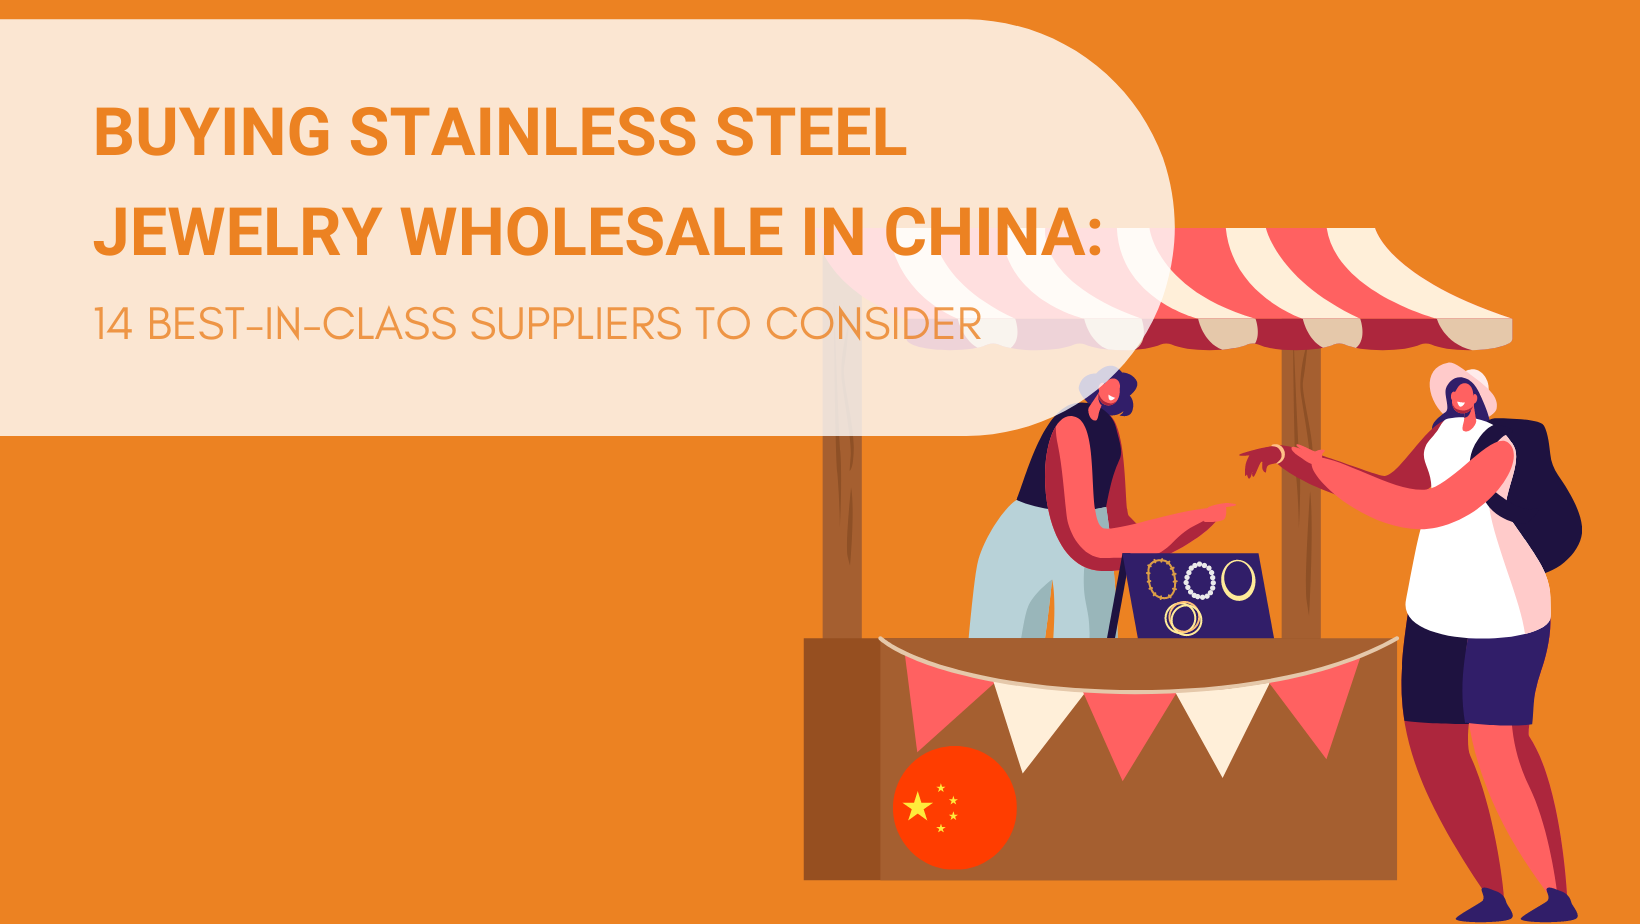 https://cdn.nichedropshipping.com/wp-content/uploads/2021/11/BUYING-STAINLESS-STEEL-JEWELRY-WHOLESALE-IN-CHINA-14-BEST-IN-CLASS-SUPPLIERS-TO-CONSIDER.png